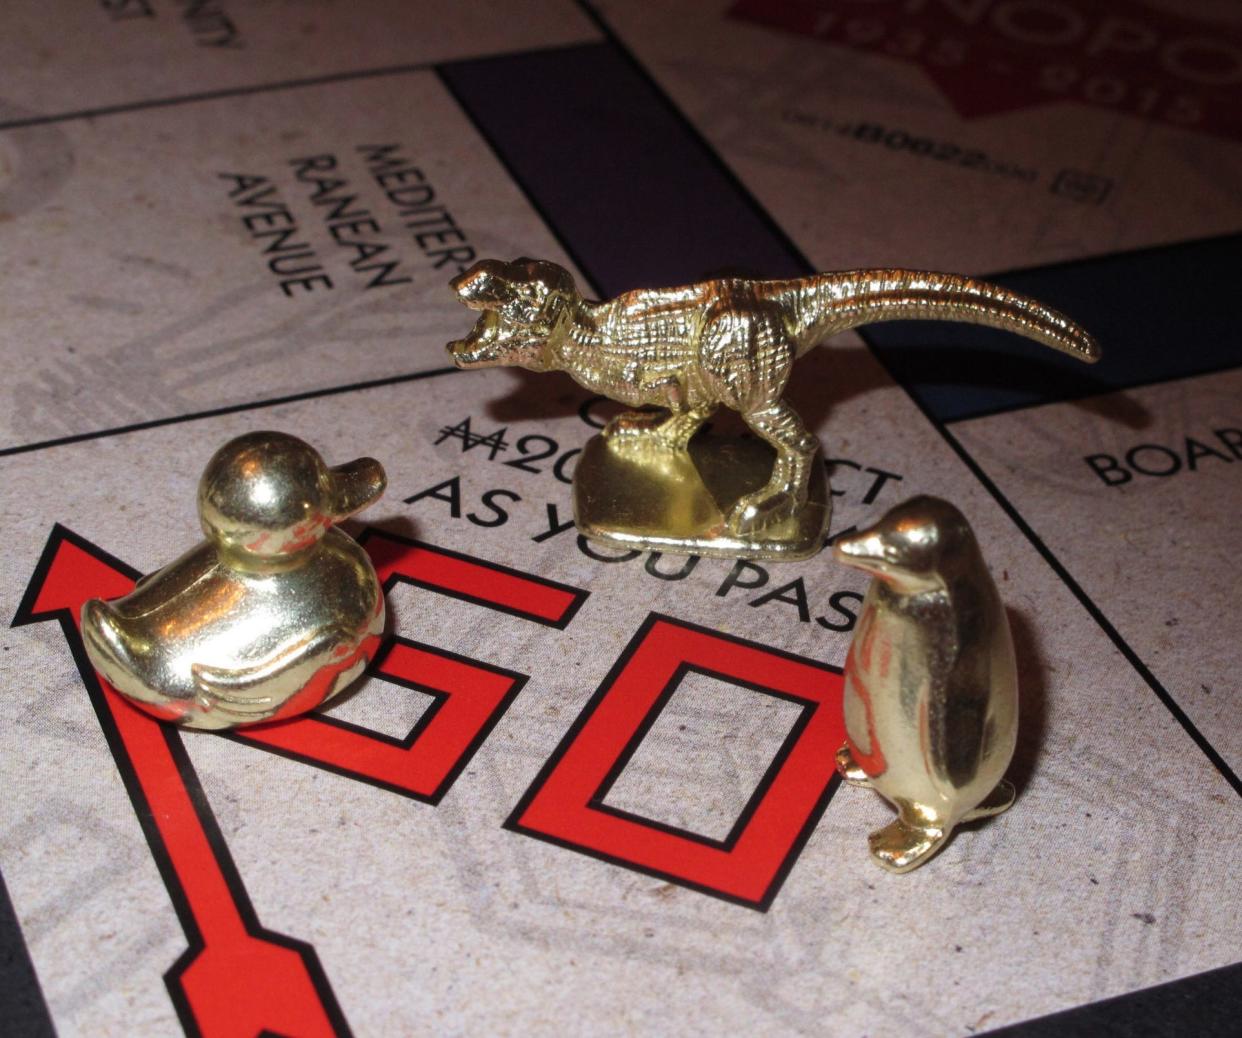 A classic game, Monopoly still works well as a holiday gift.